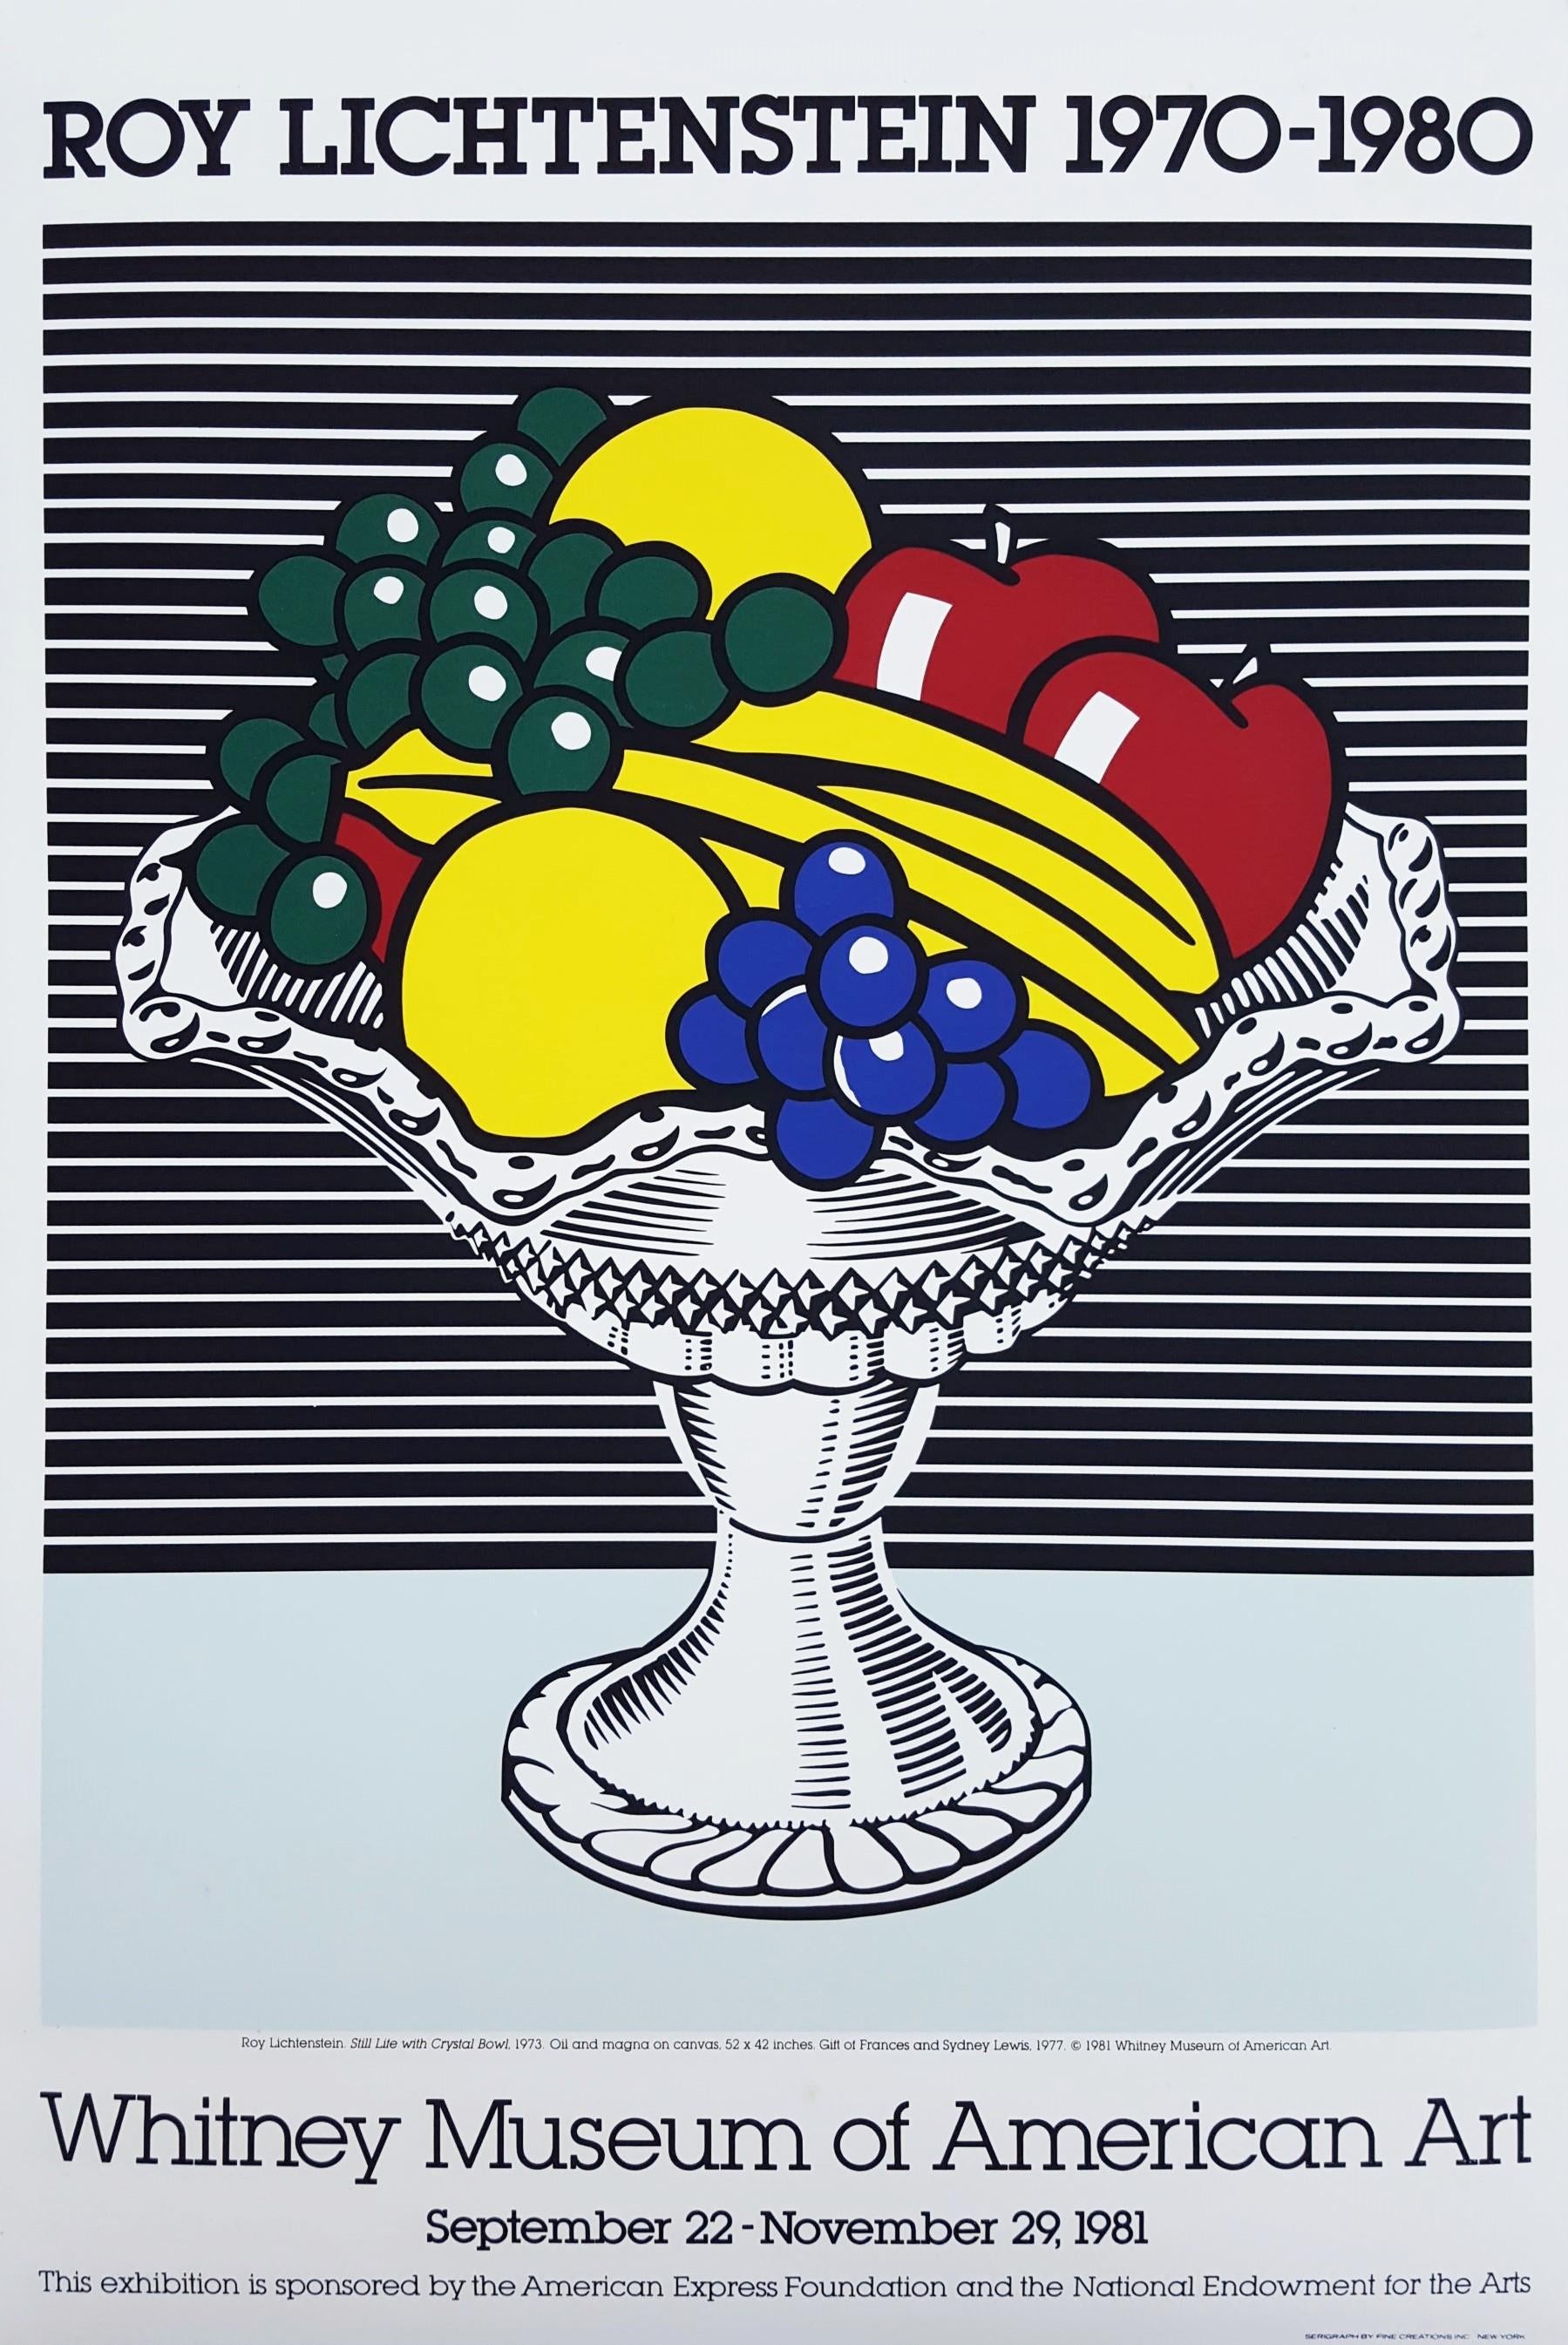 (after) Roy Lichtenstein Still-Life Print - Whitney Museum of American Art (Still Life with Crystal Bowl)